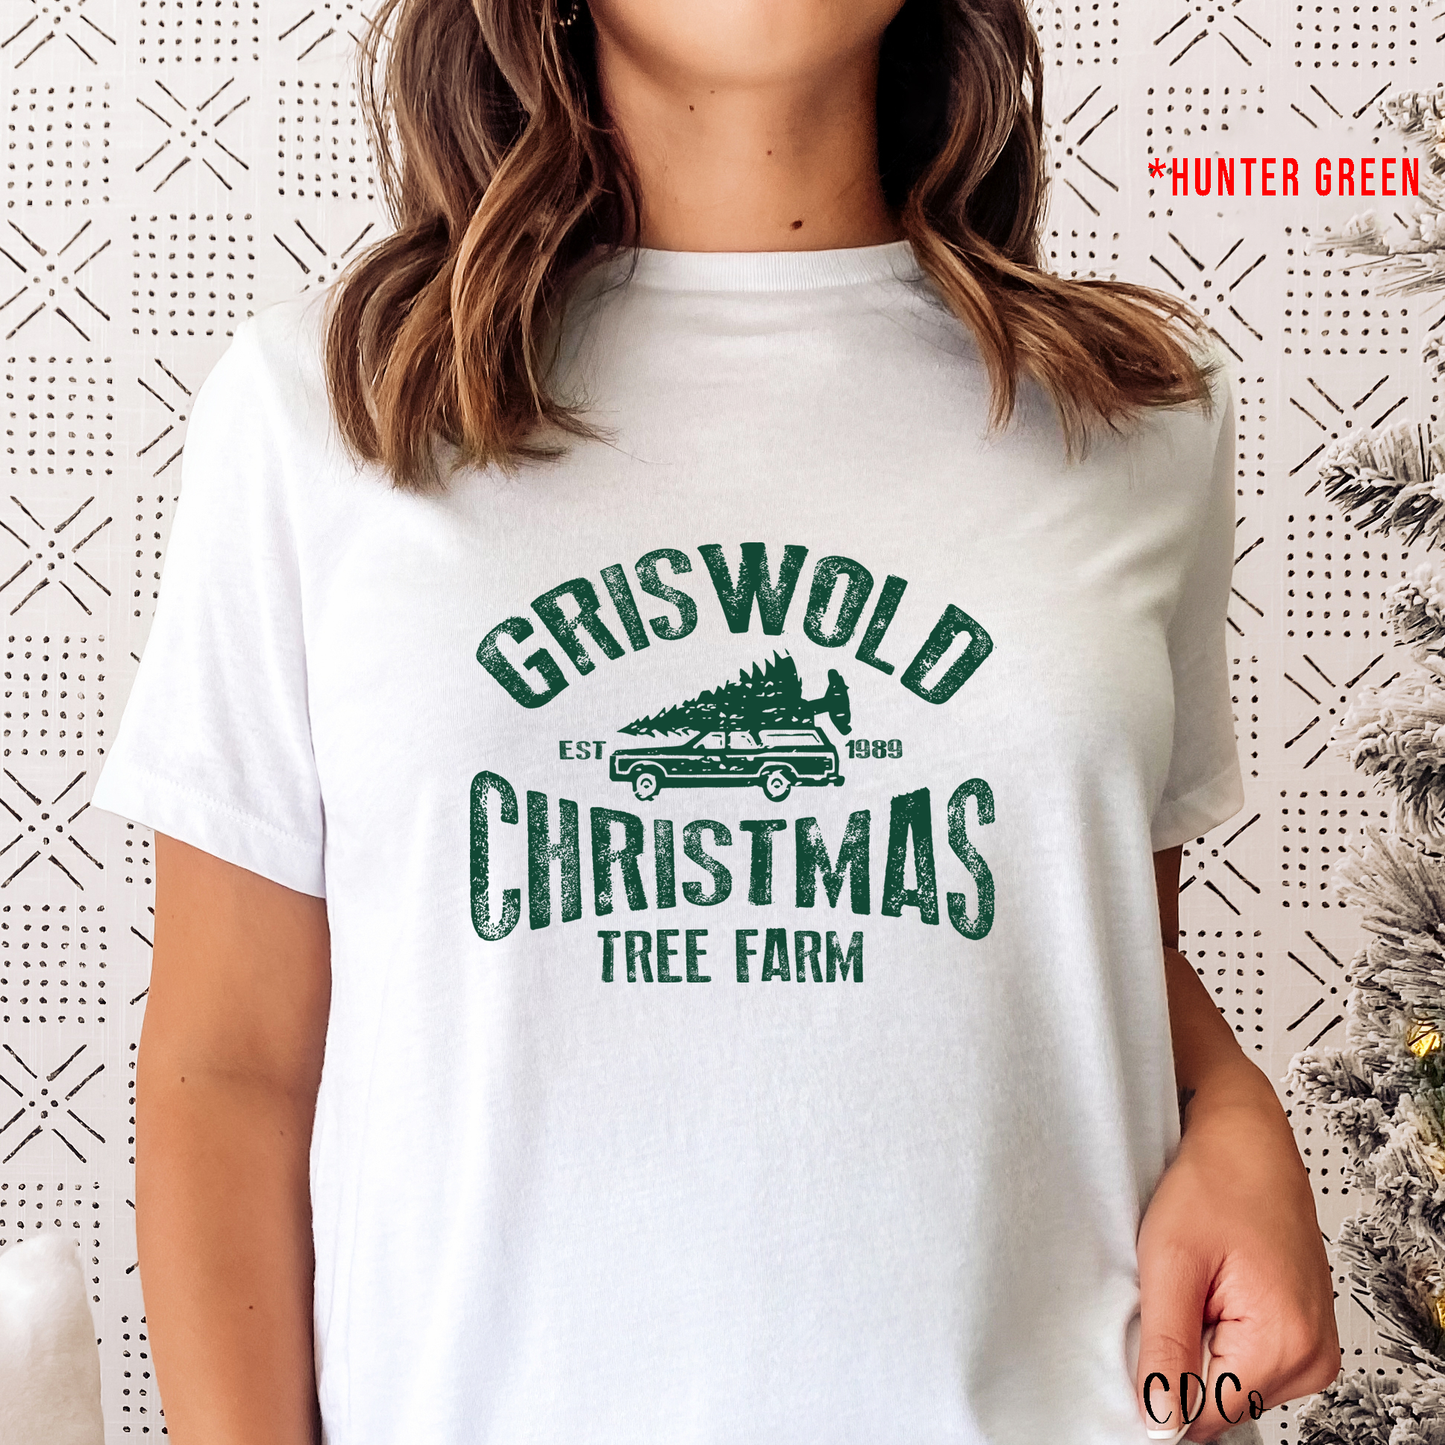 Griswold Christmas Tree Farm - Hunter Green (325°)